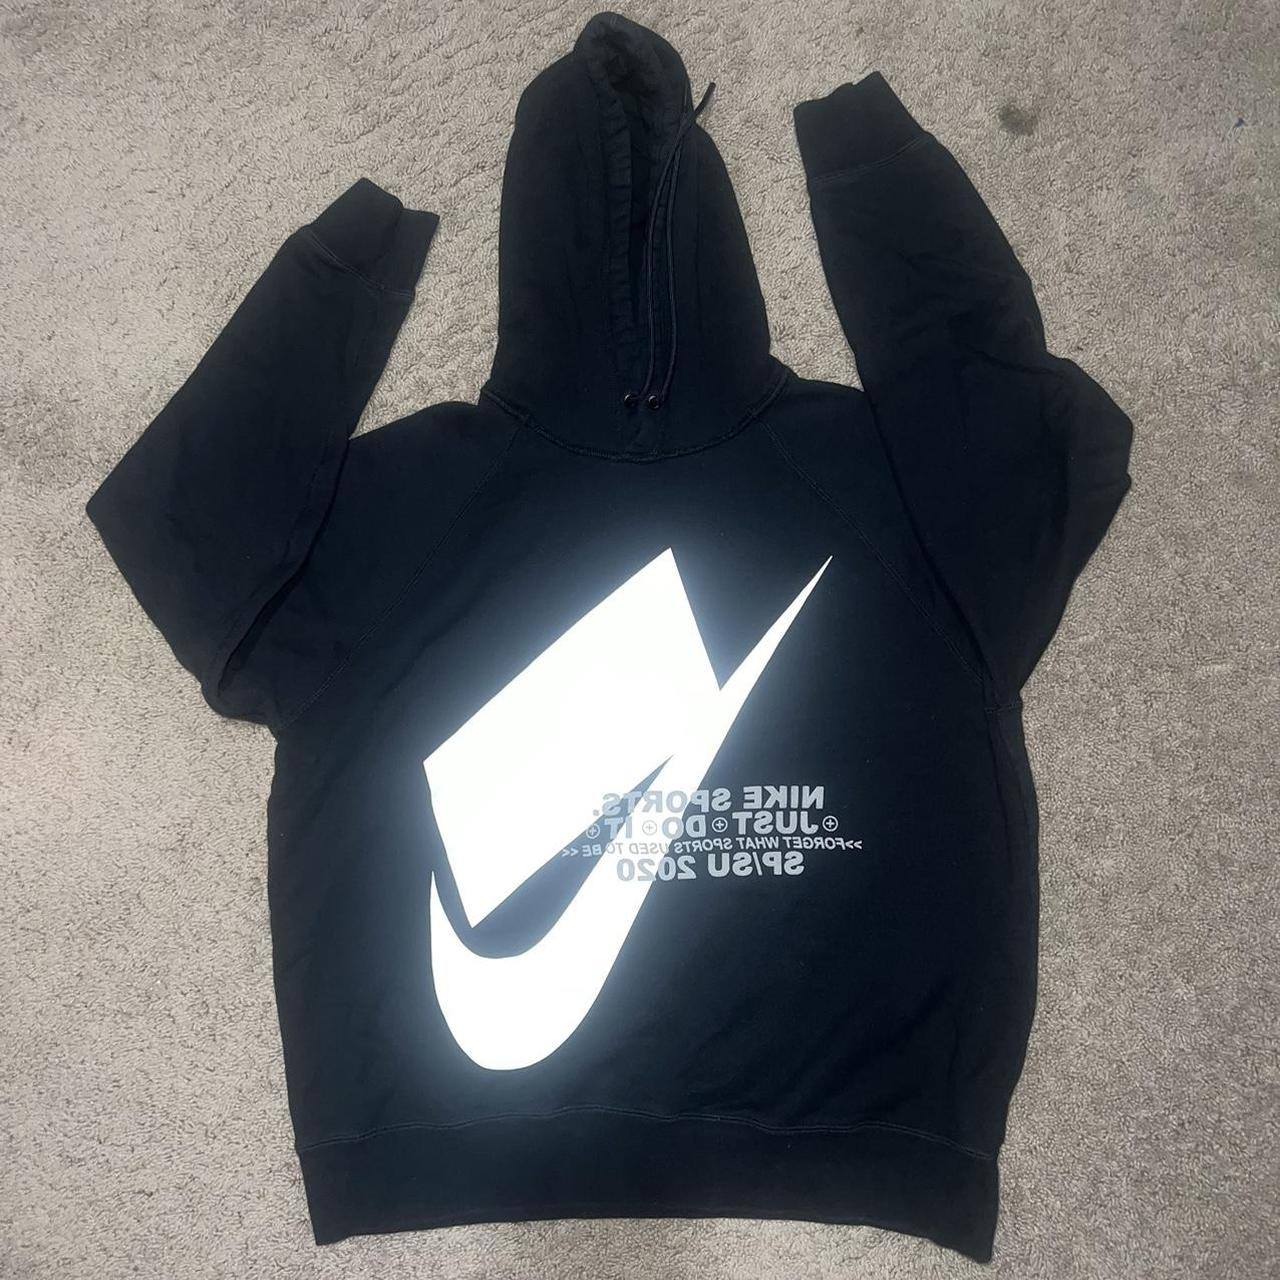 item listed by vcsteals